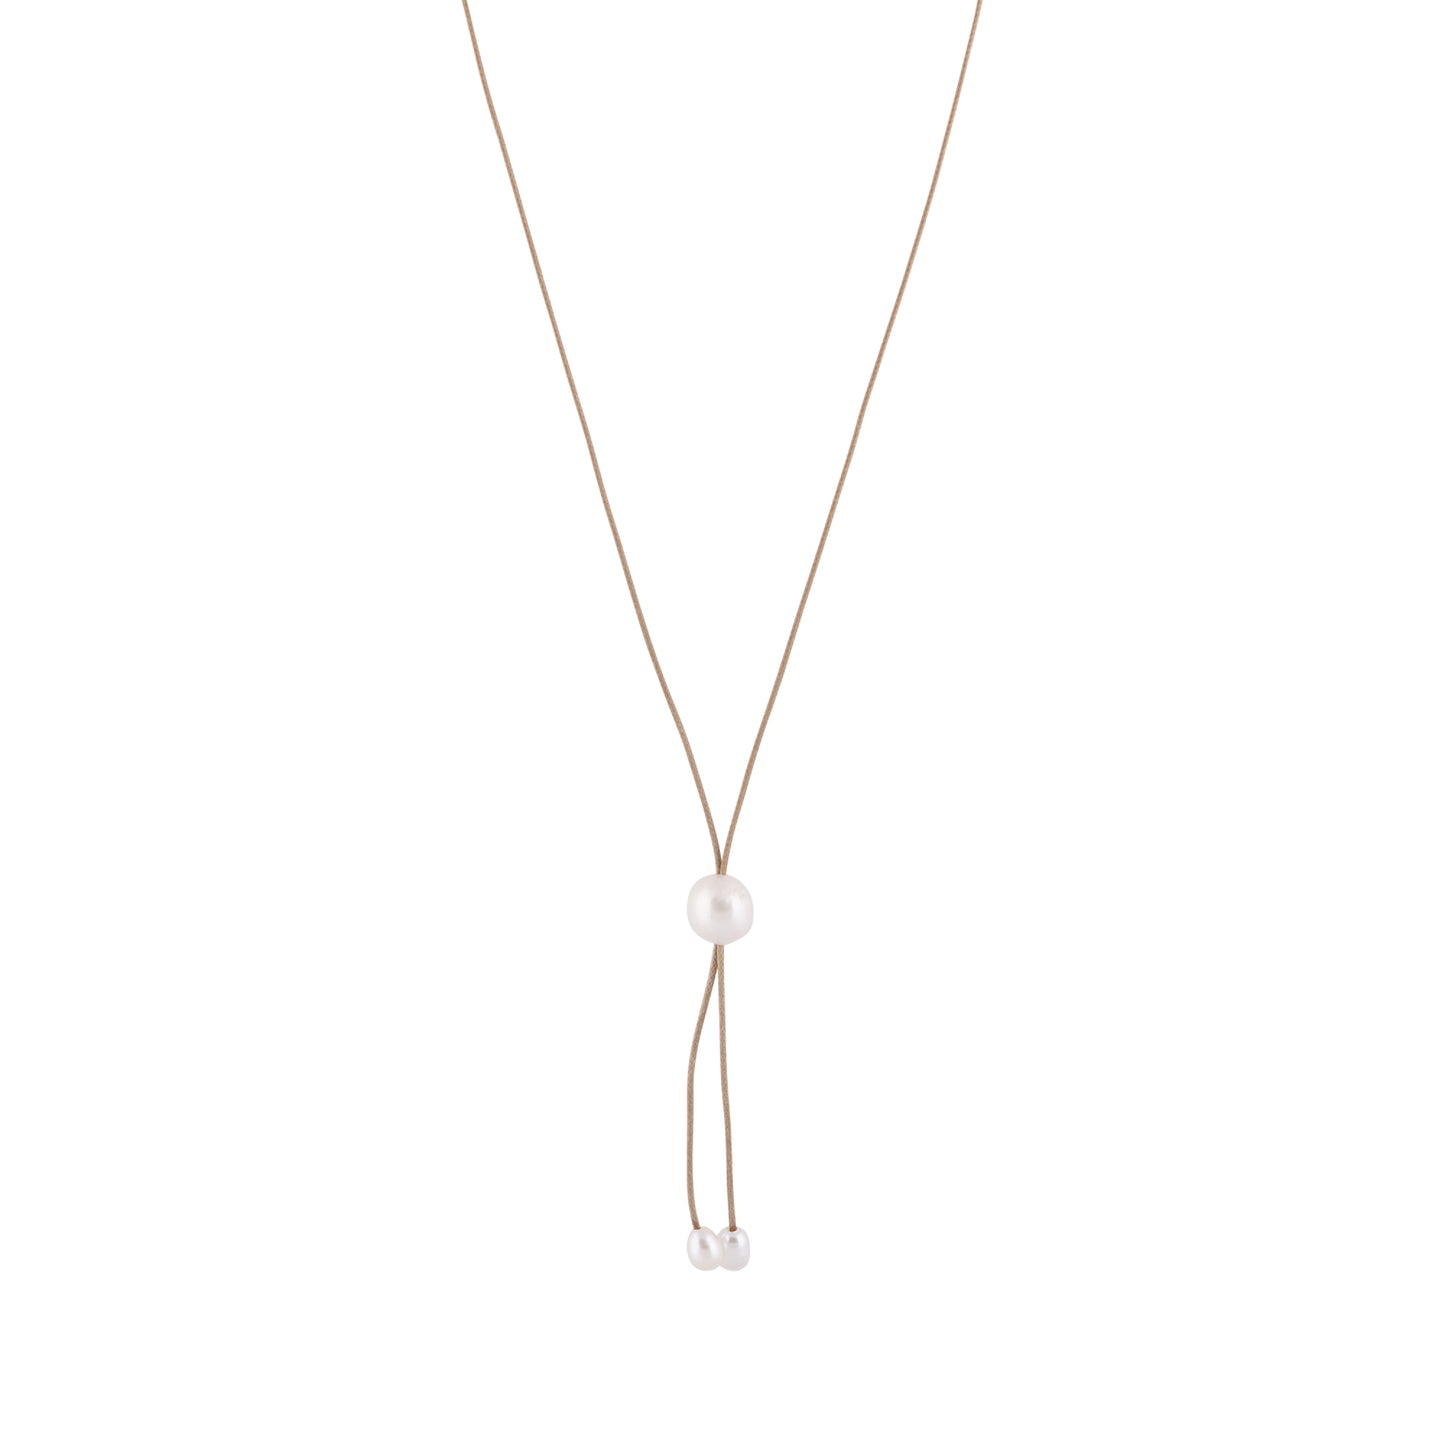 Lily - Freshwater pearl bolo tie (Tan strand, white pearls)